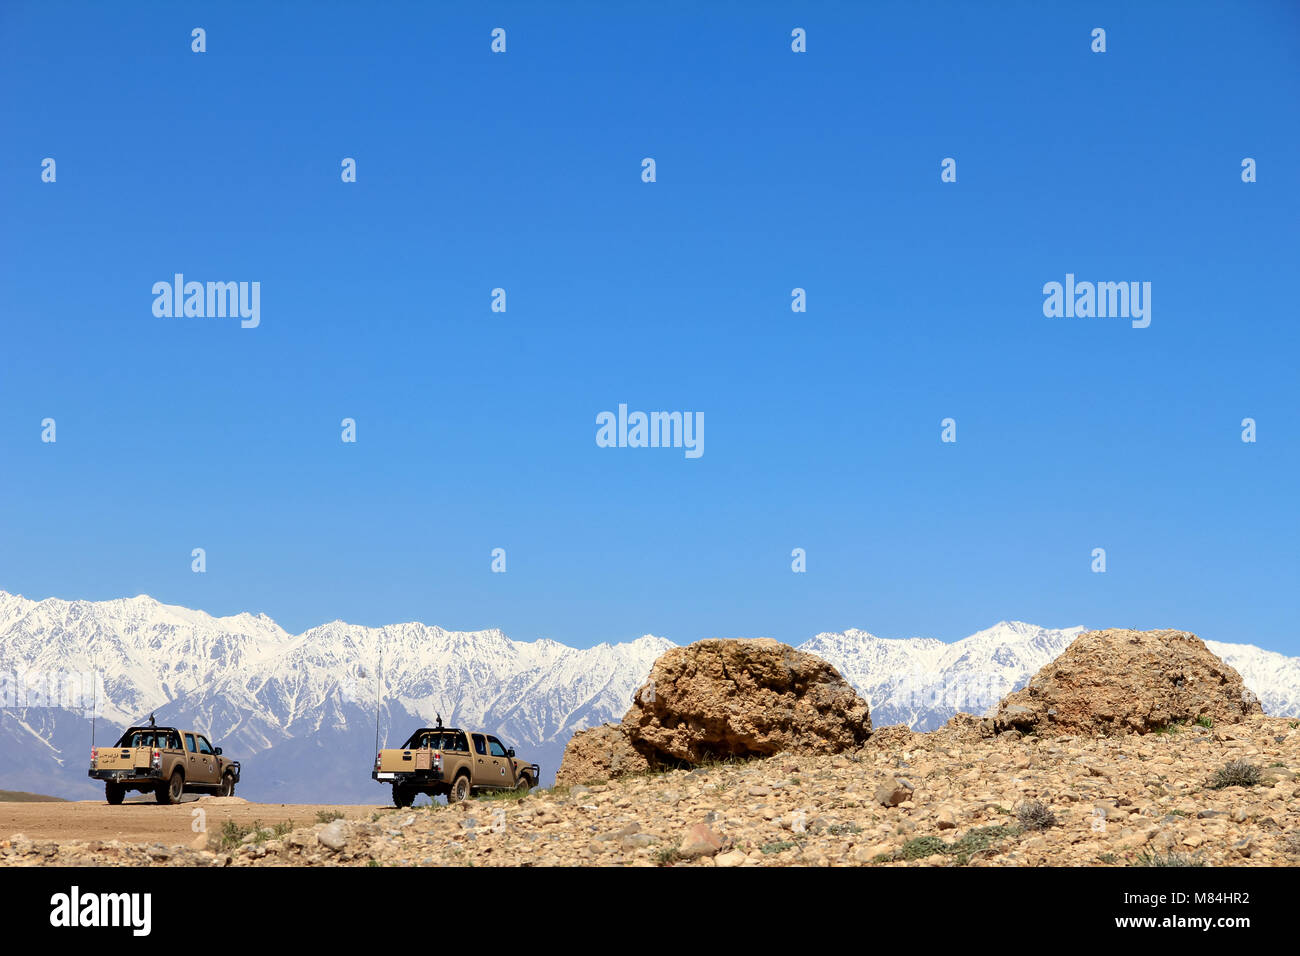 Two afghan military vehicles, two rocks and a mountain. Army Exercise at BlackHorse Camp, Cabul, Afghanistan. Stock Photo